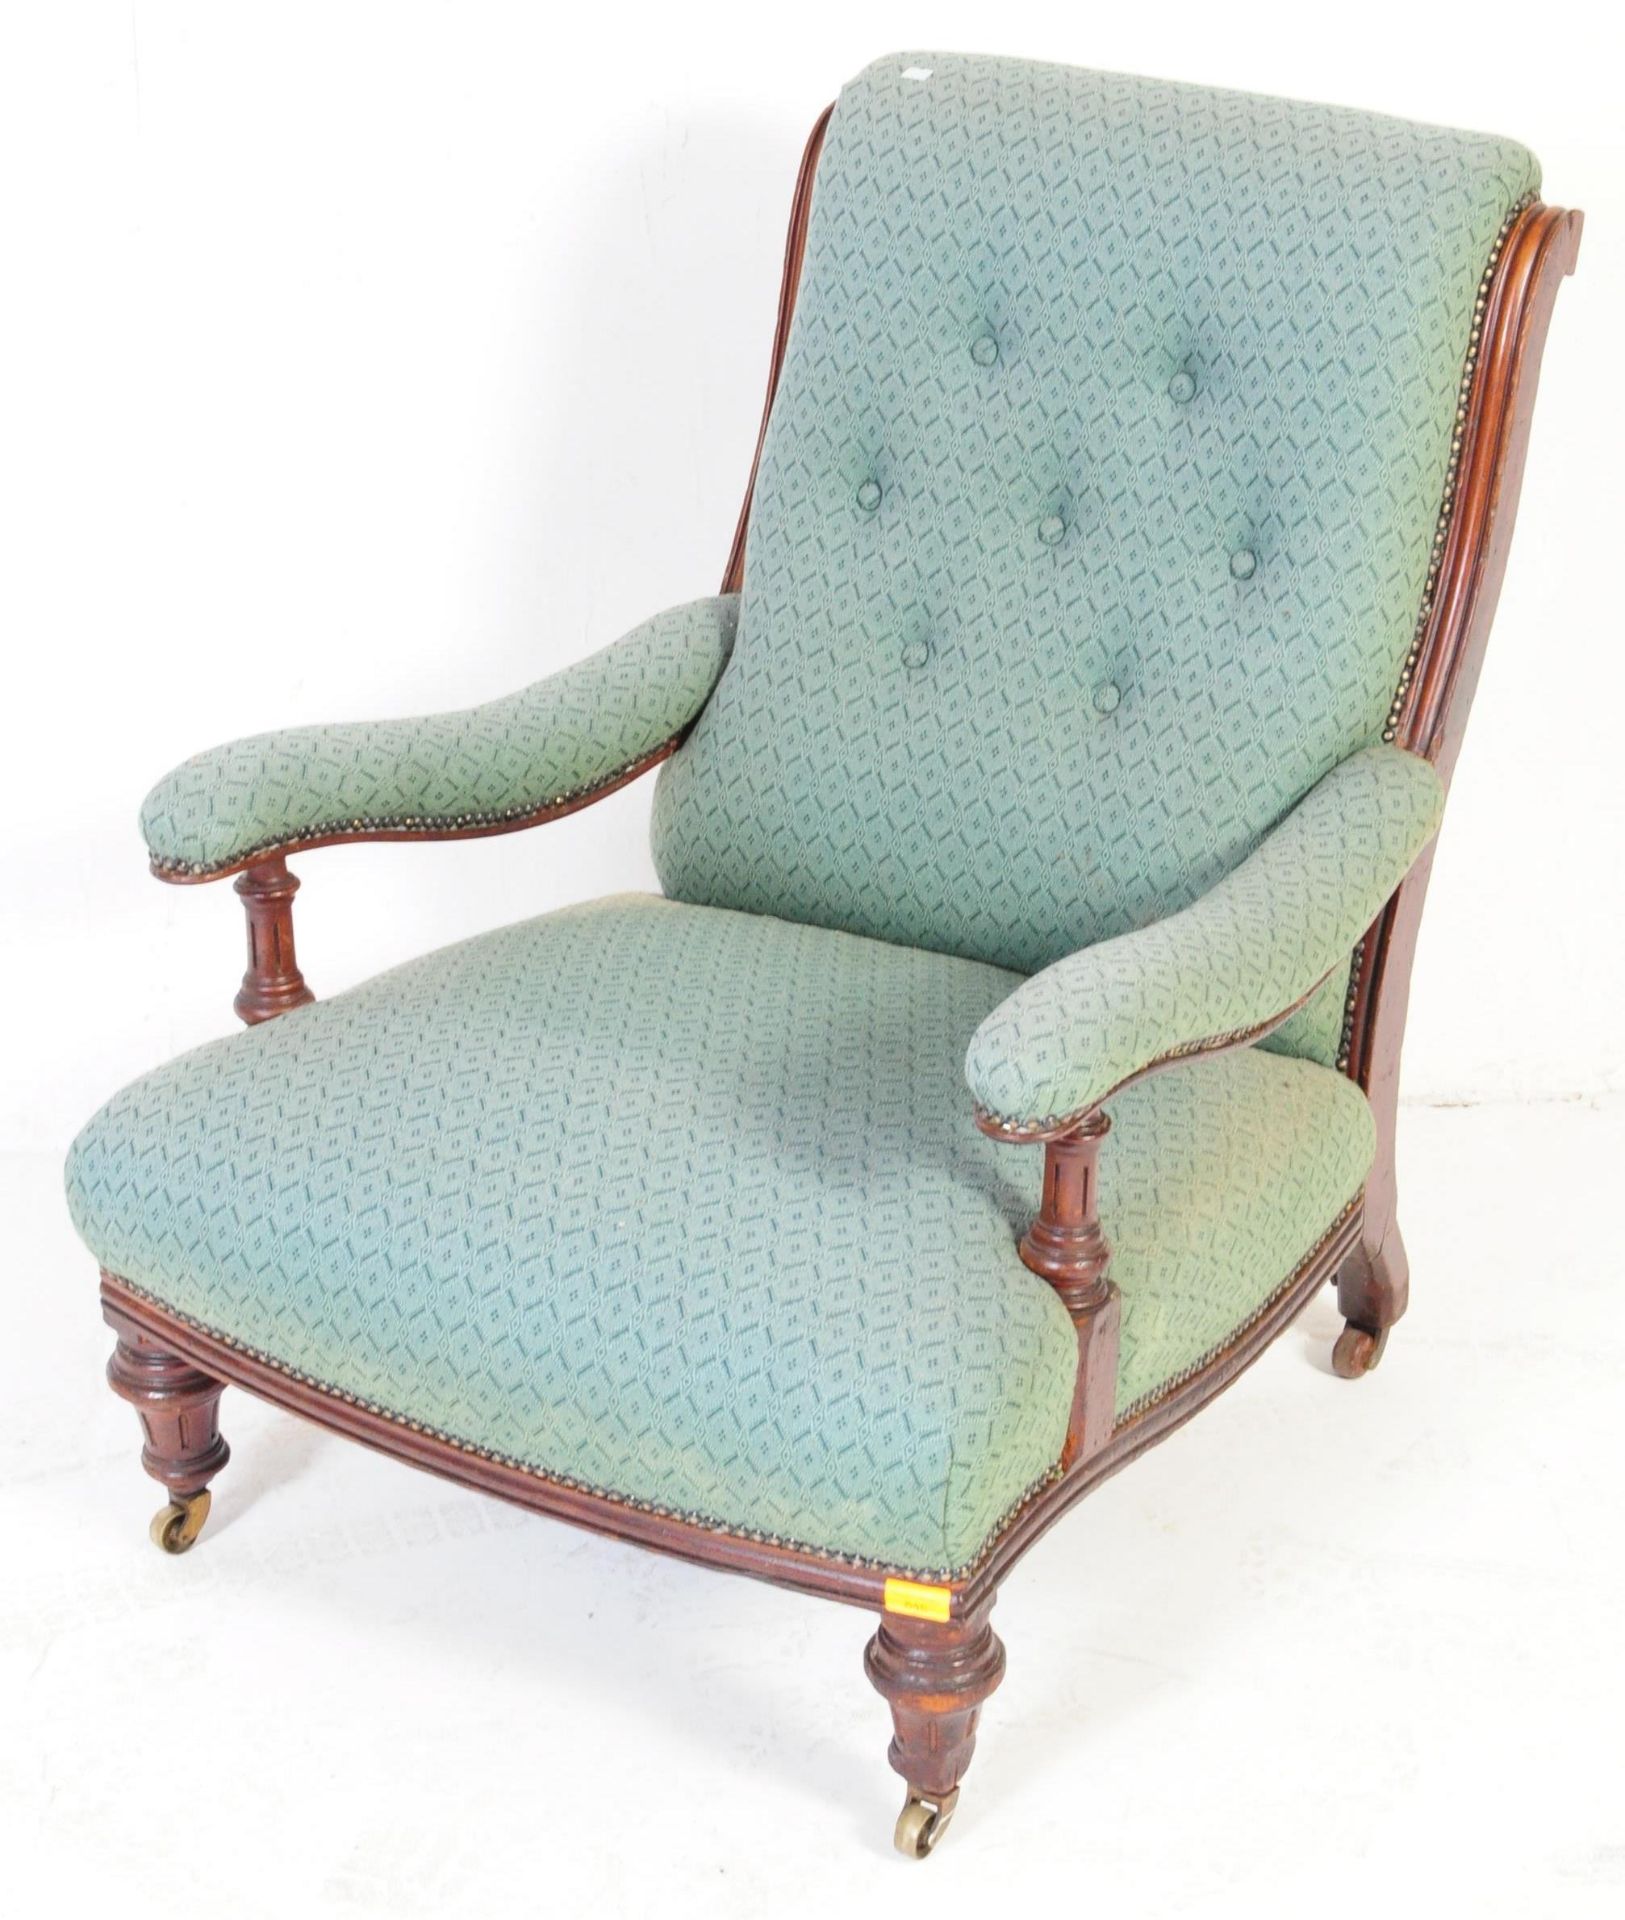 EARLY 20TH CENTURY GENTLEMANS LIBRARY CHAIR - Image 2 of 5